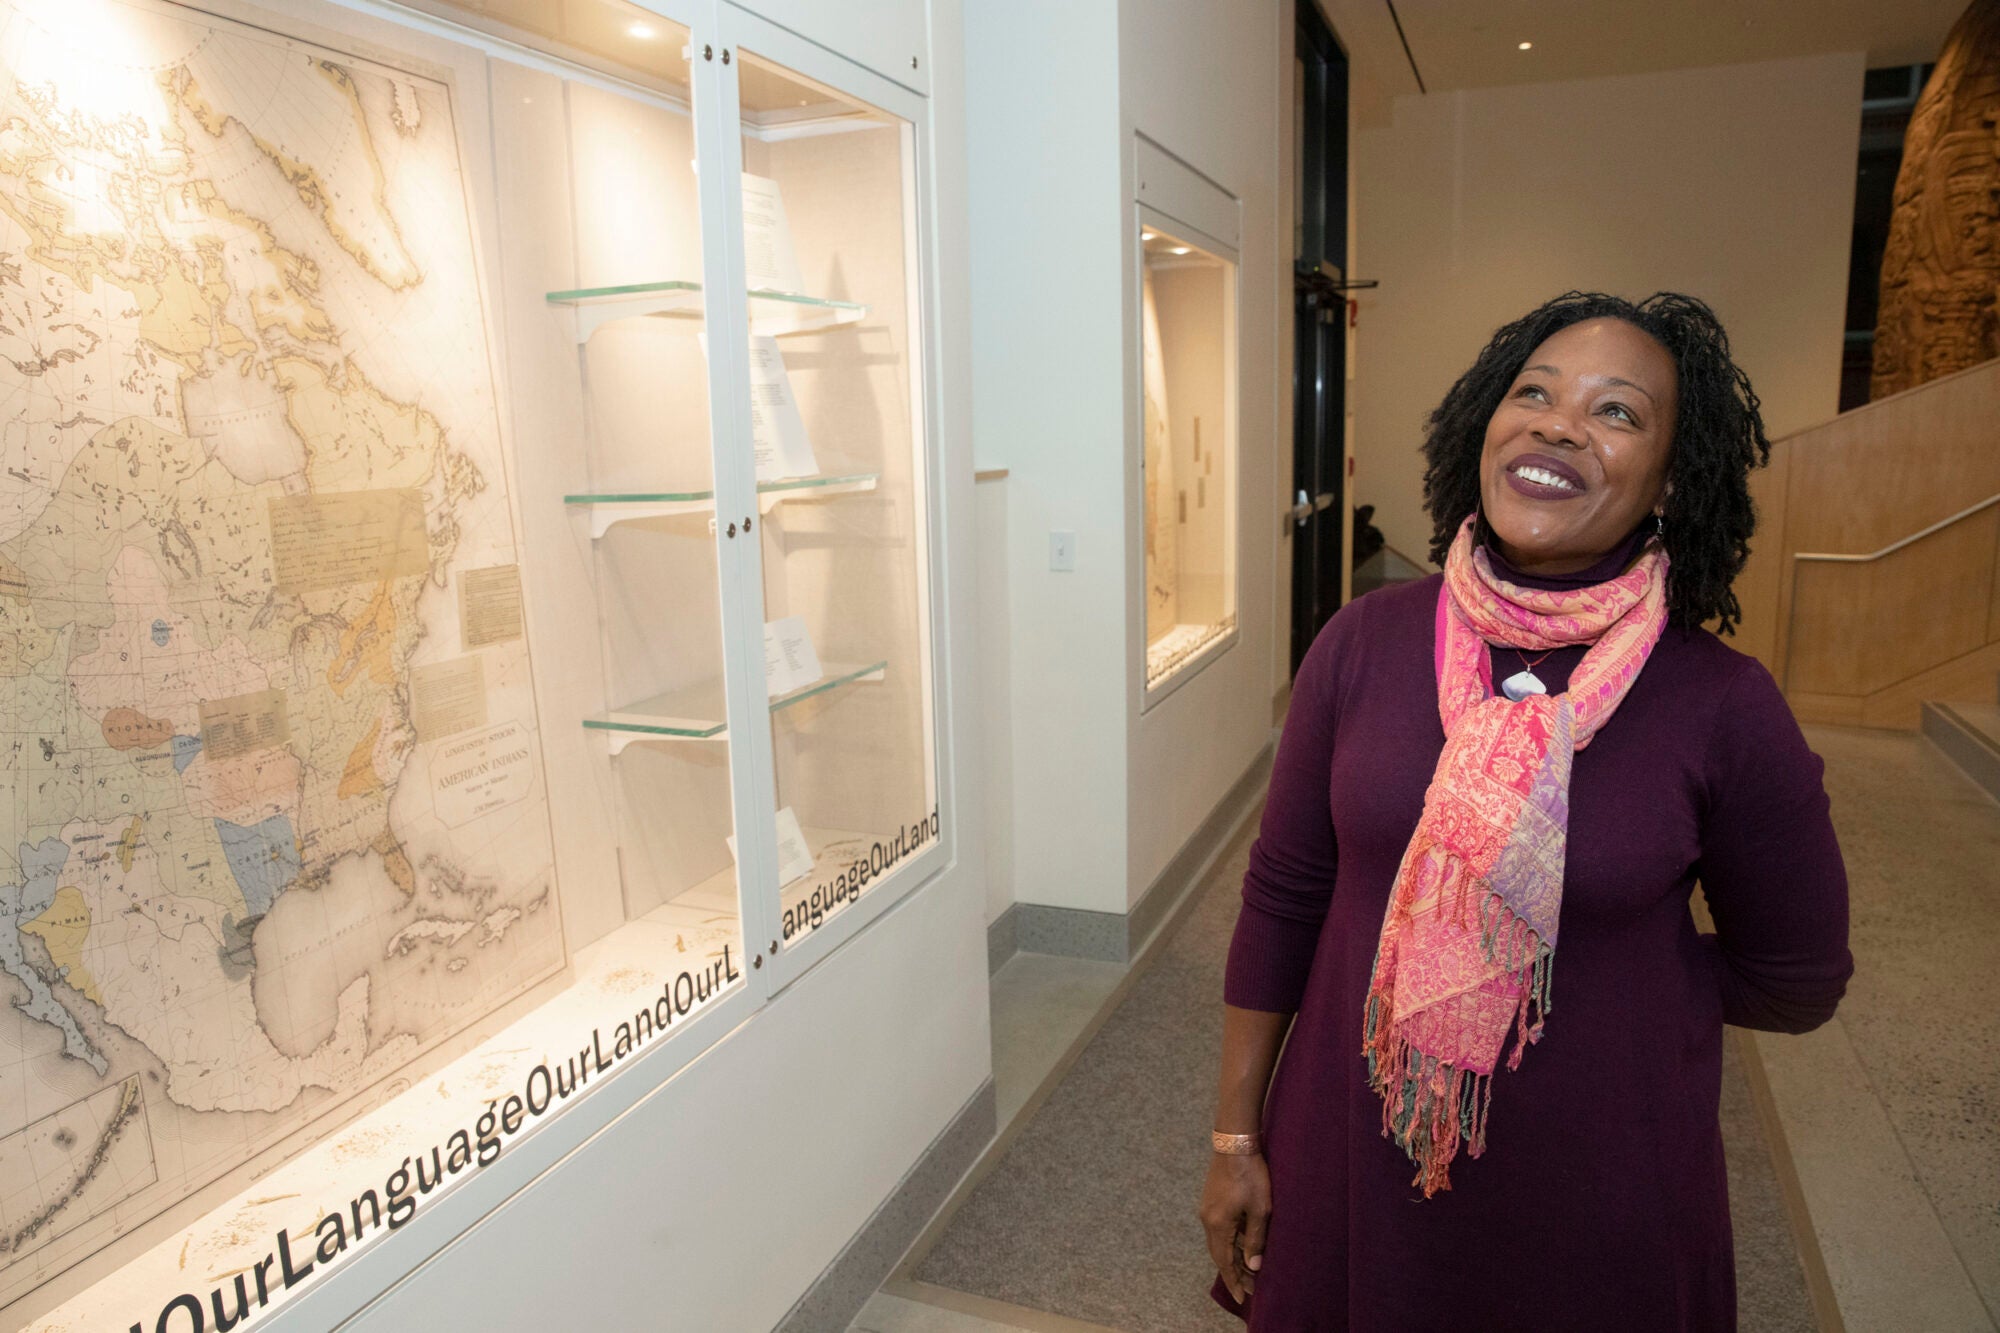 A woman stands by an art exhibit smiling.